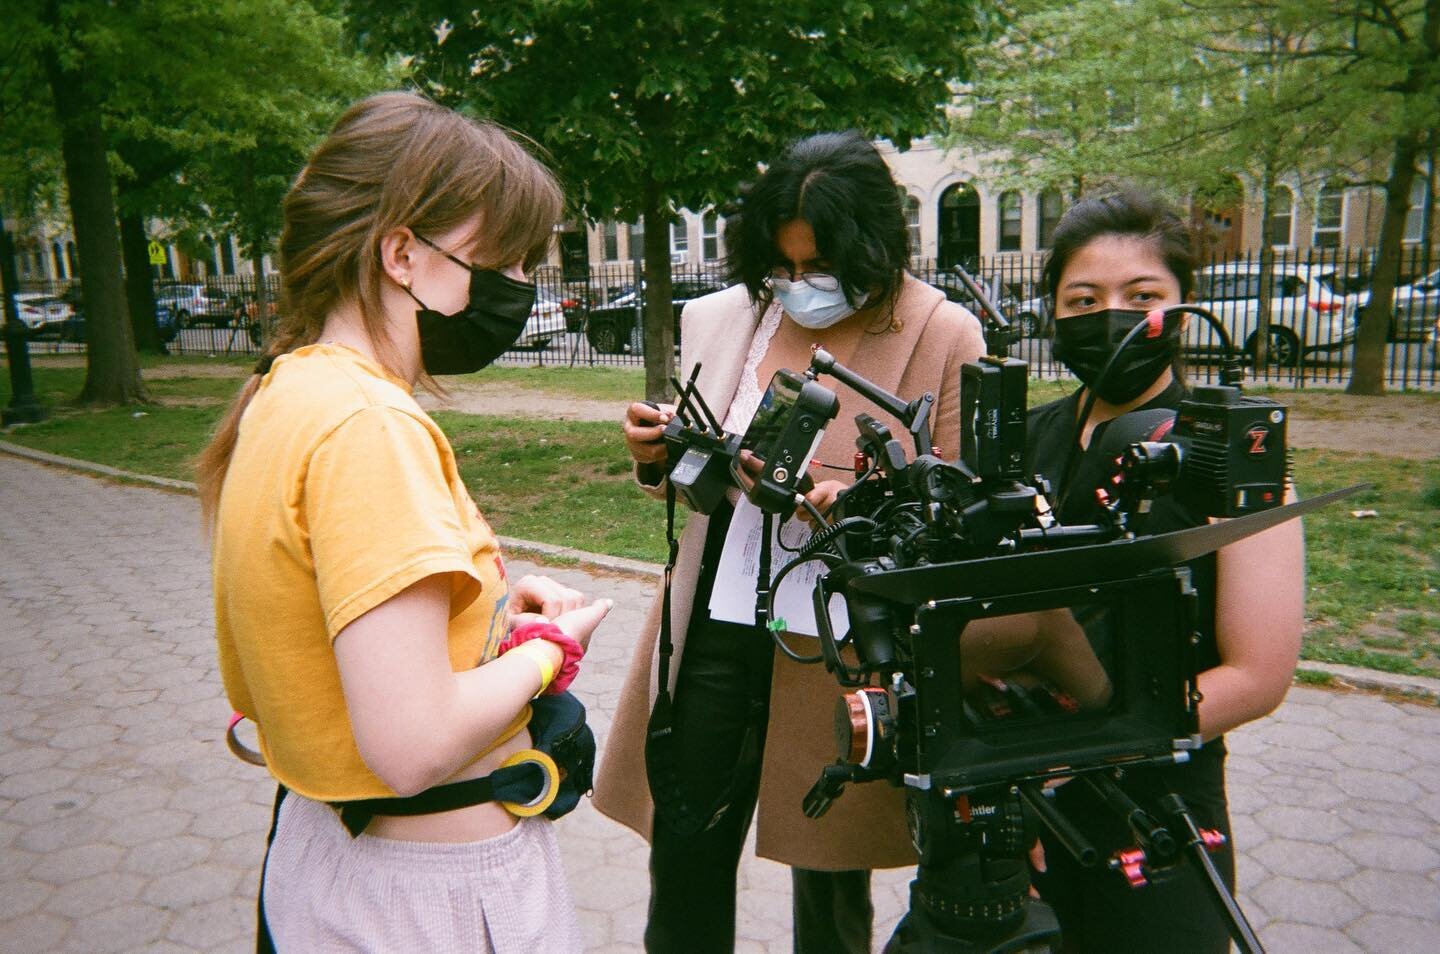 BTS of our director, DP, and 1st AC setting up for the perfect shot! 

They really were the dream team😍✨